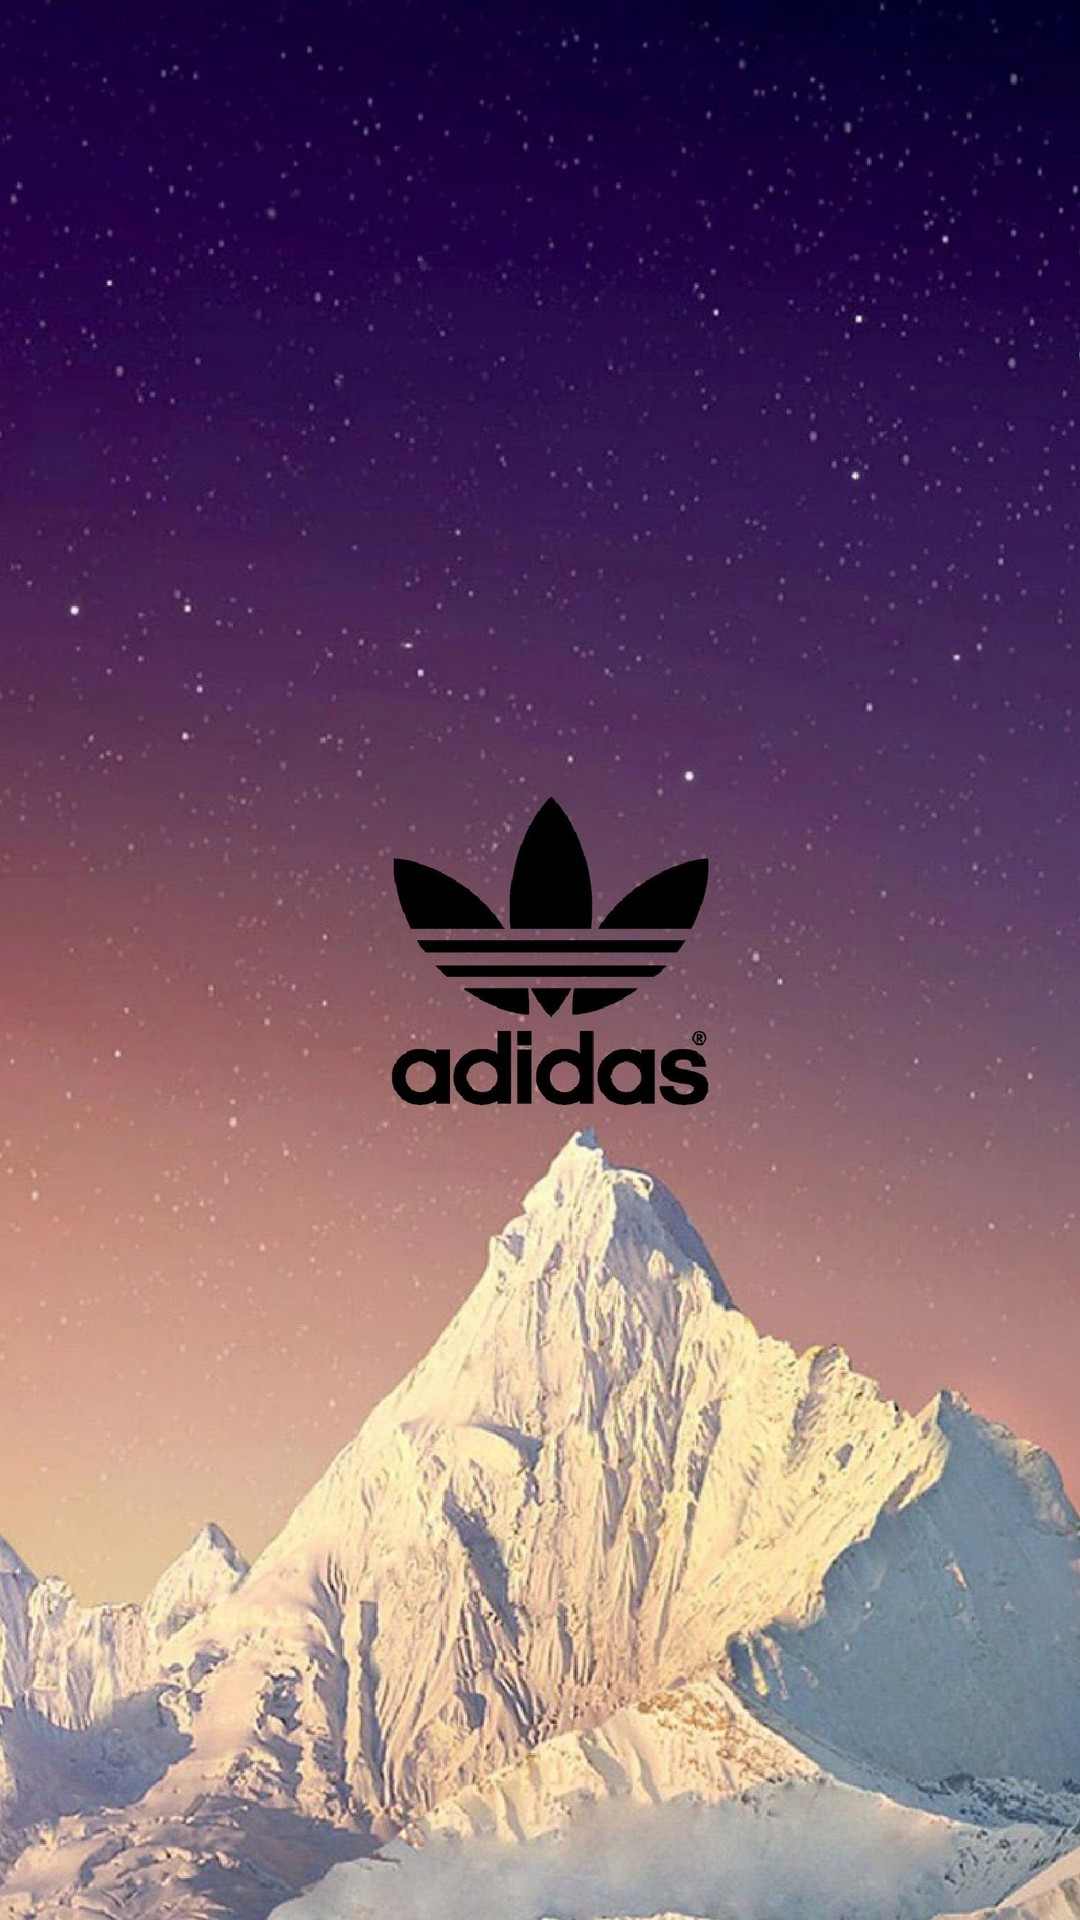 Free download Adidas Wallpaper iPhone 2019 3D iPhone Wallpaper [1080x1920]  for your Desktop, Mobile & Tablet | Explore 52+ Adidas Wallpapers for iPhone  | Adidas 2015 Wallpaper, Adidas Wallpapers, Adidas Wallpaper